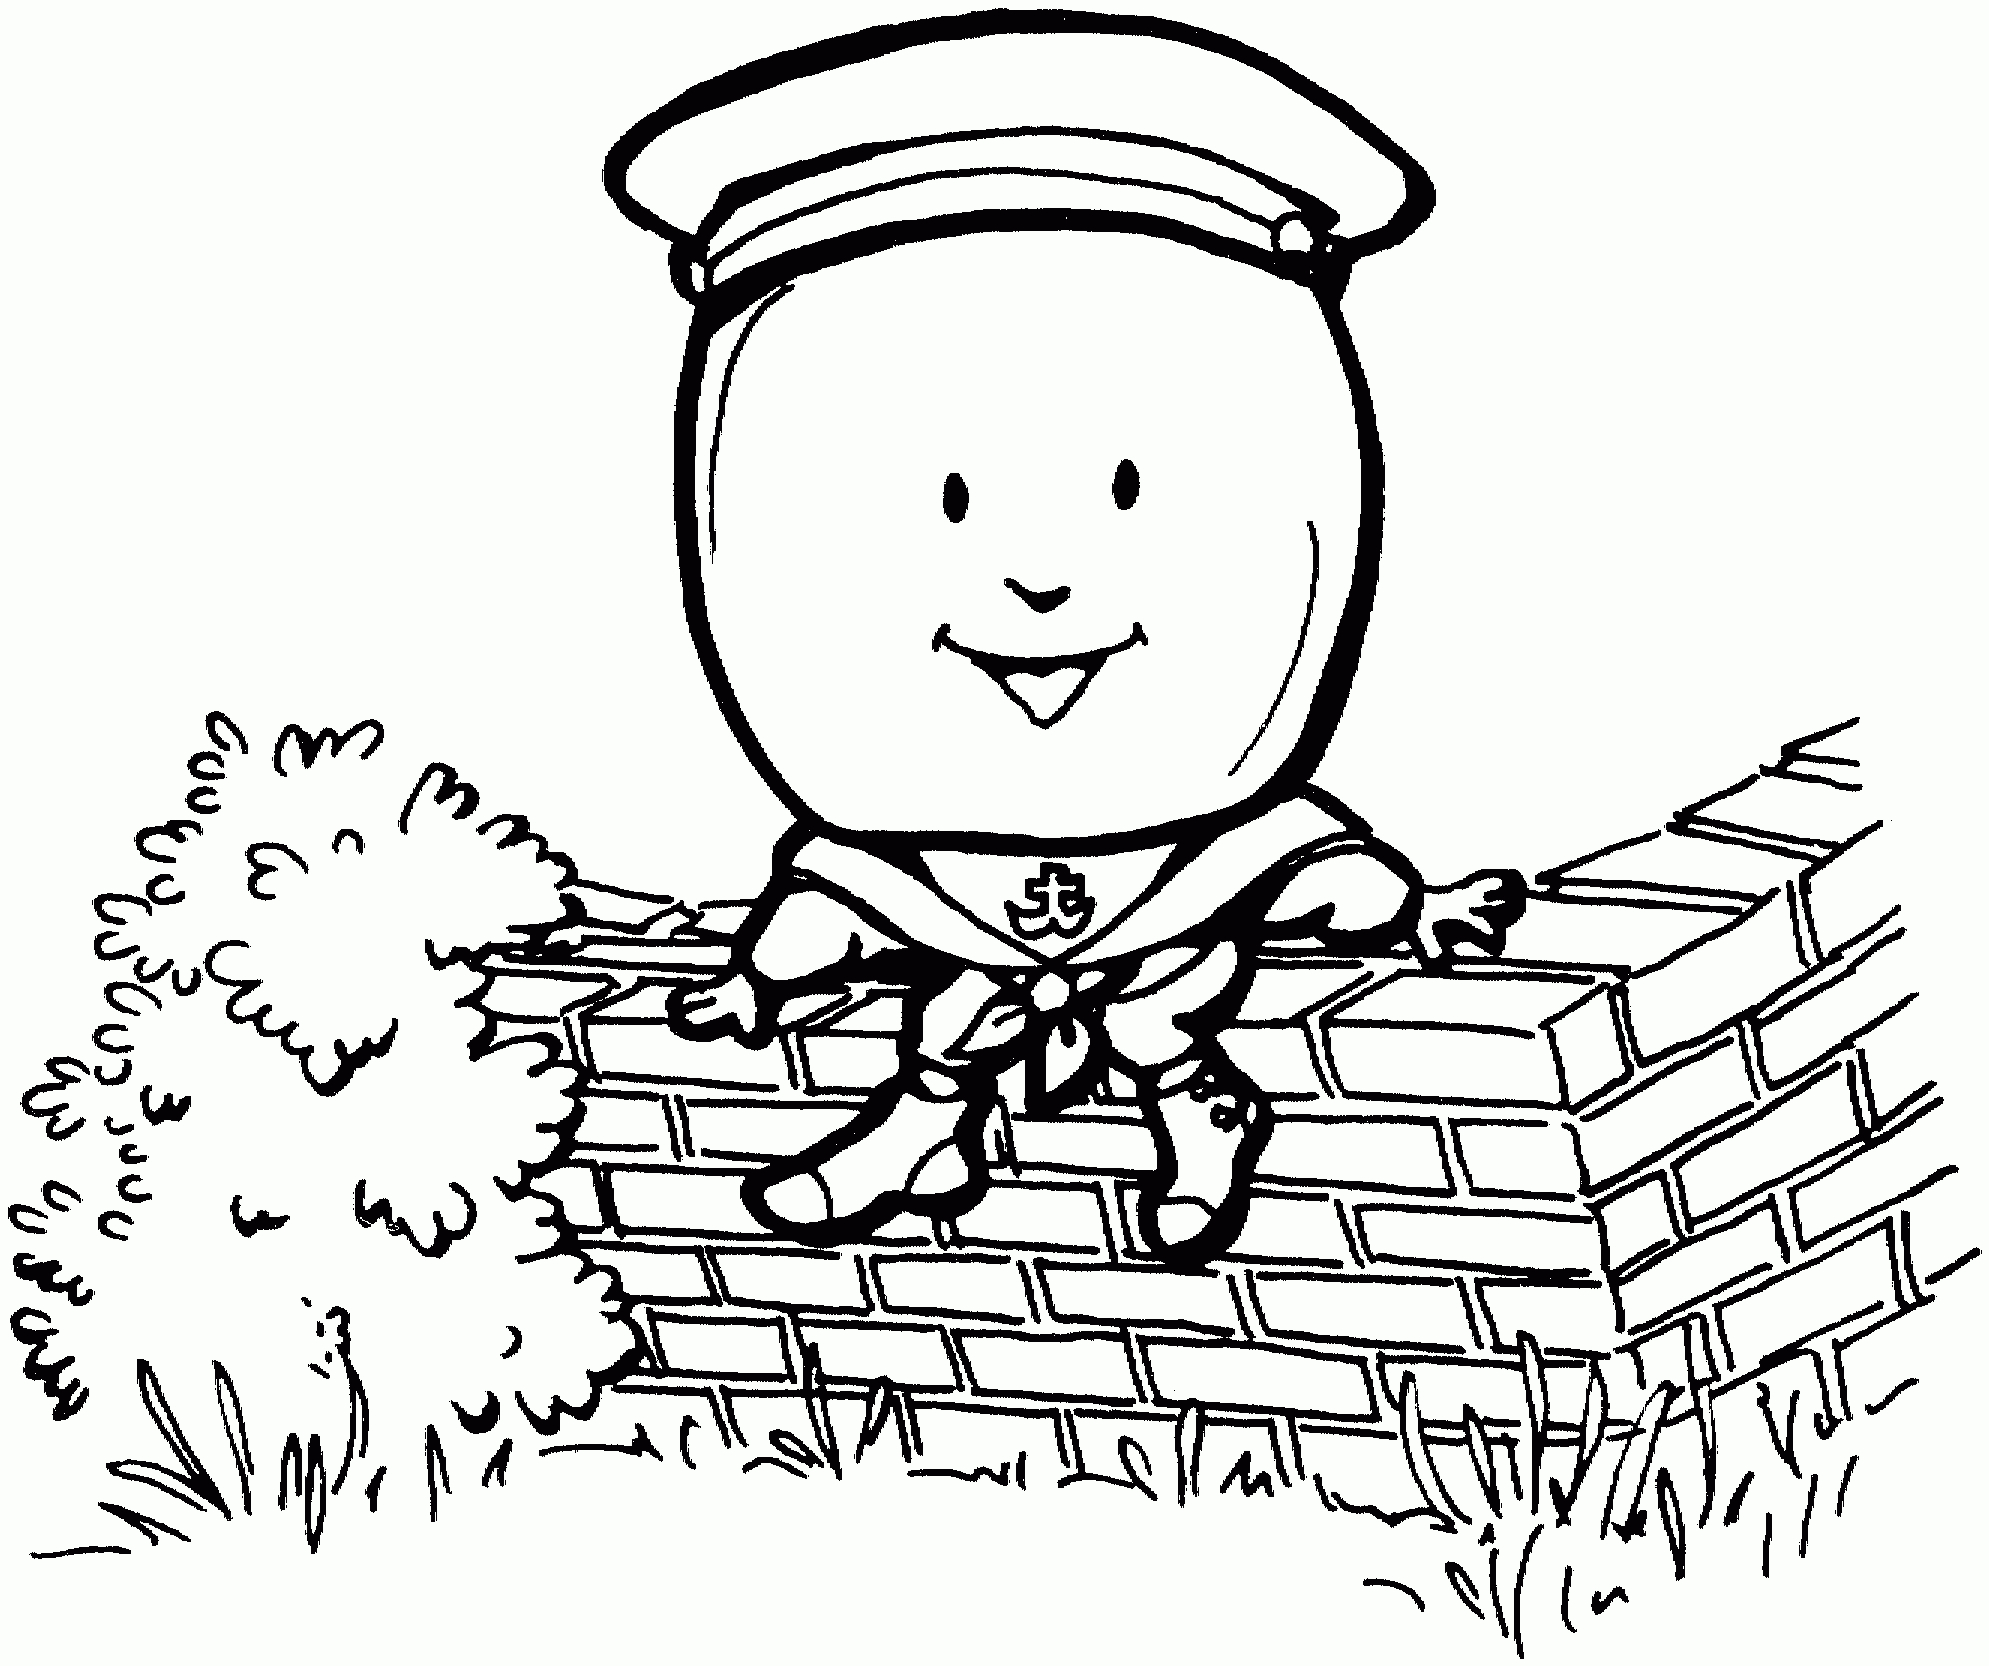 Humpty Dumpty Coloring Pages To Download And Print For Free - Free Printable Nursery Rhyme Coloring Pages